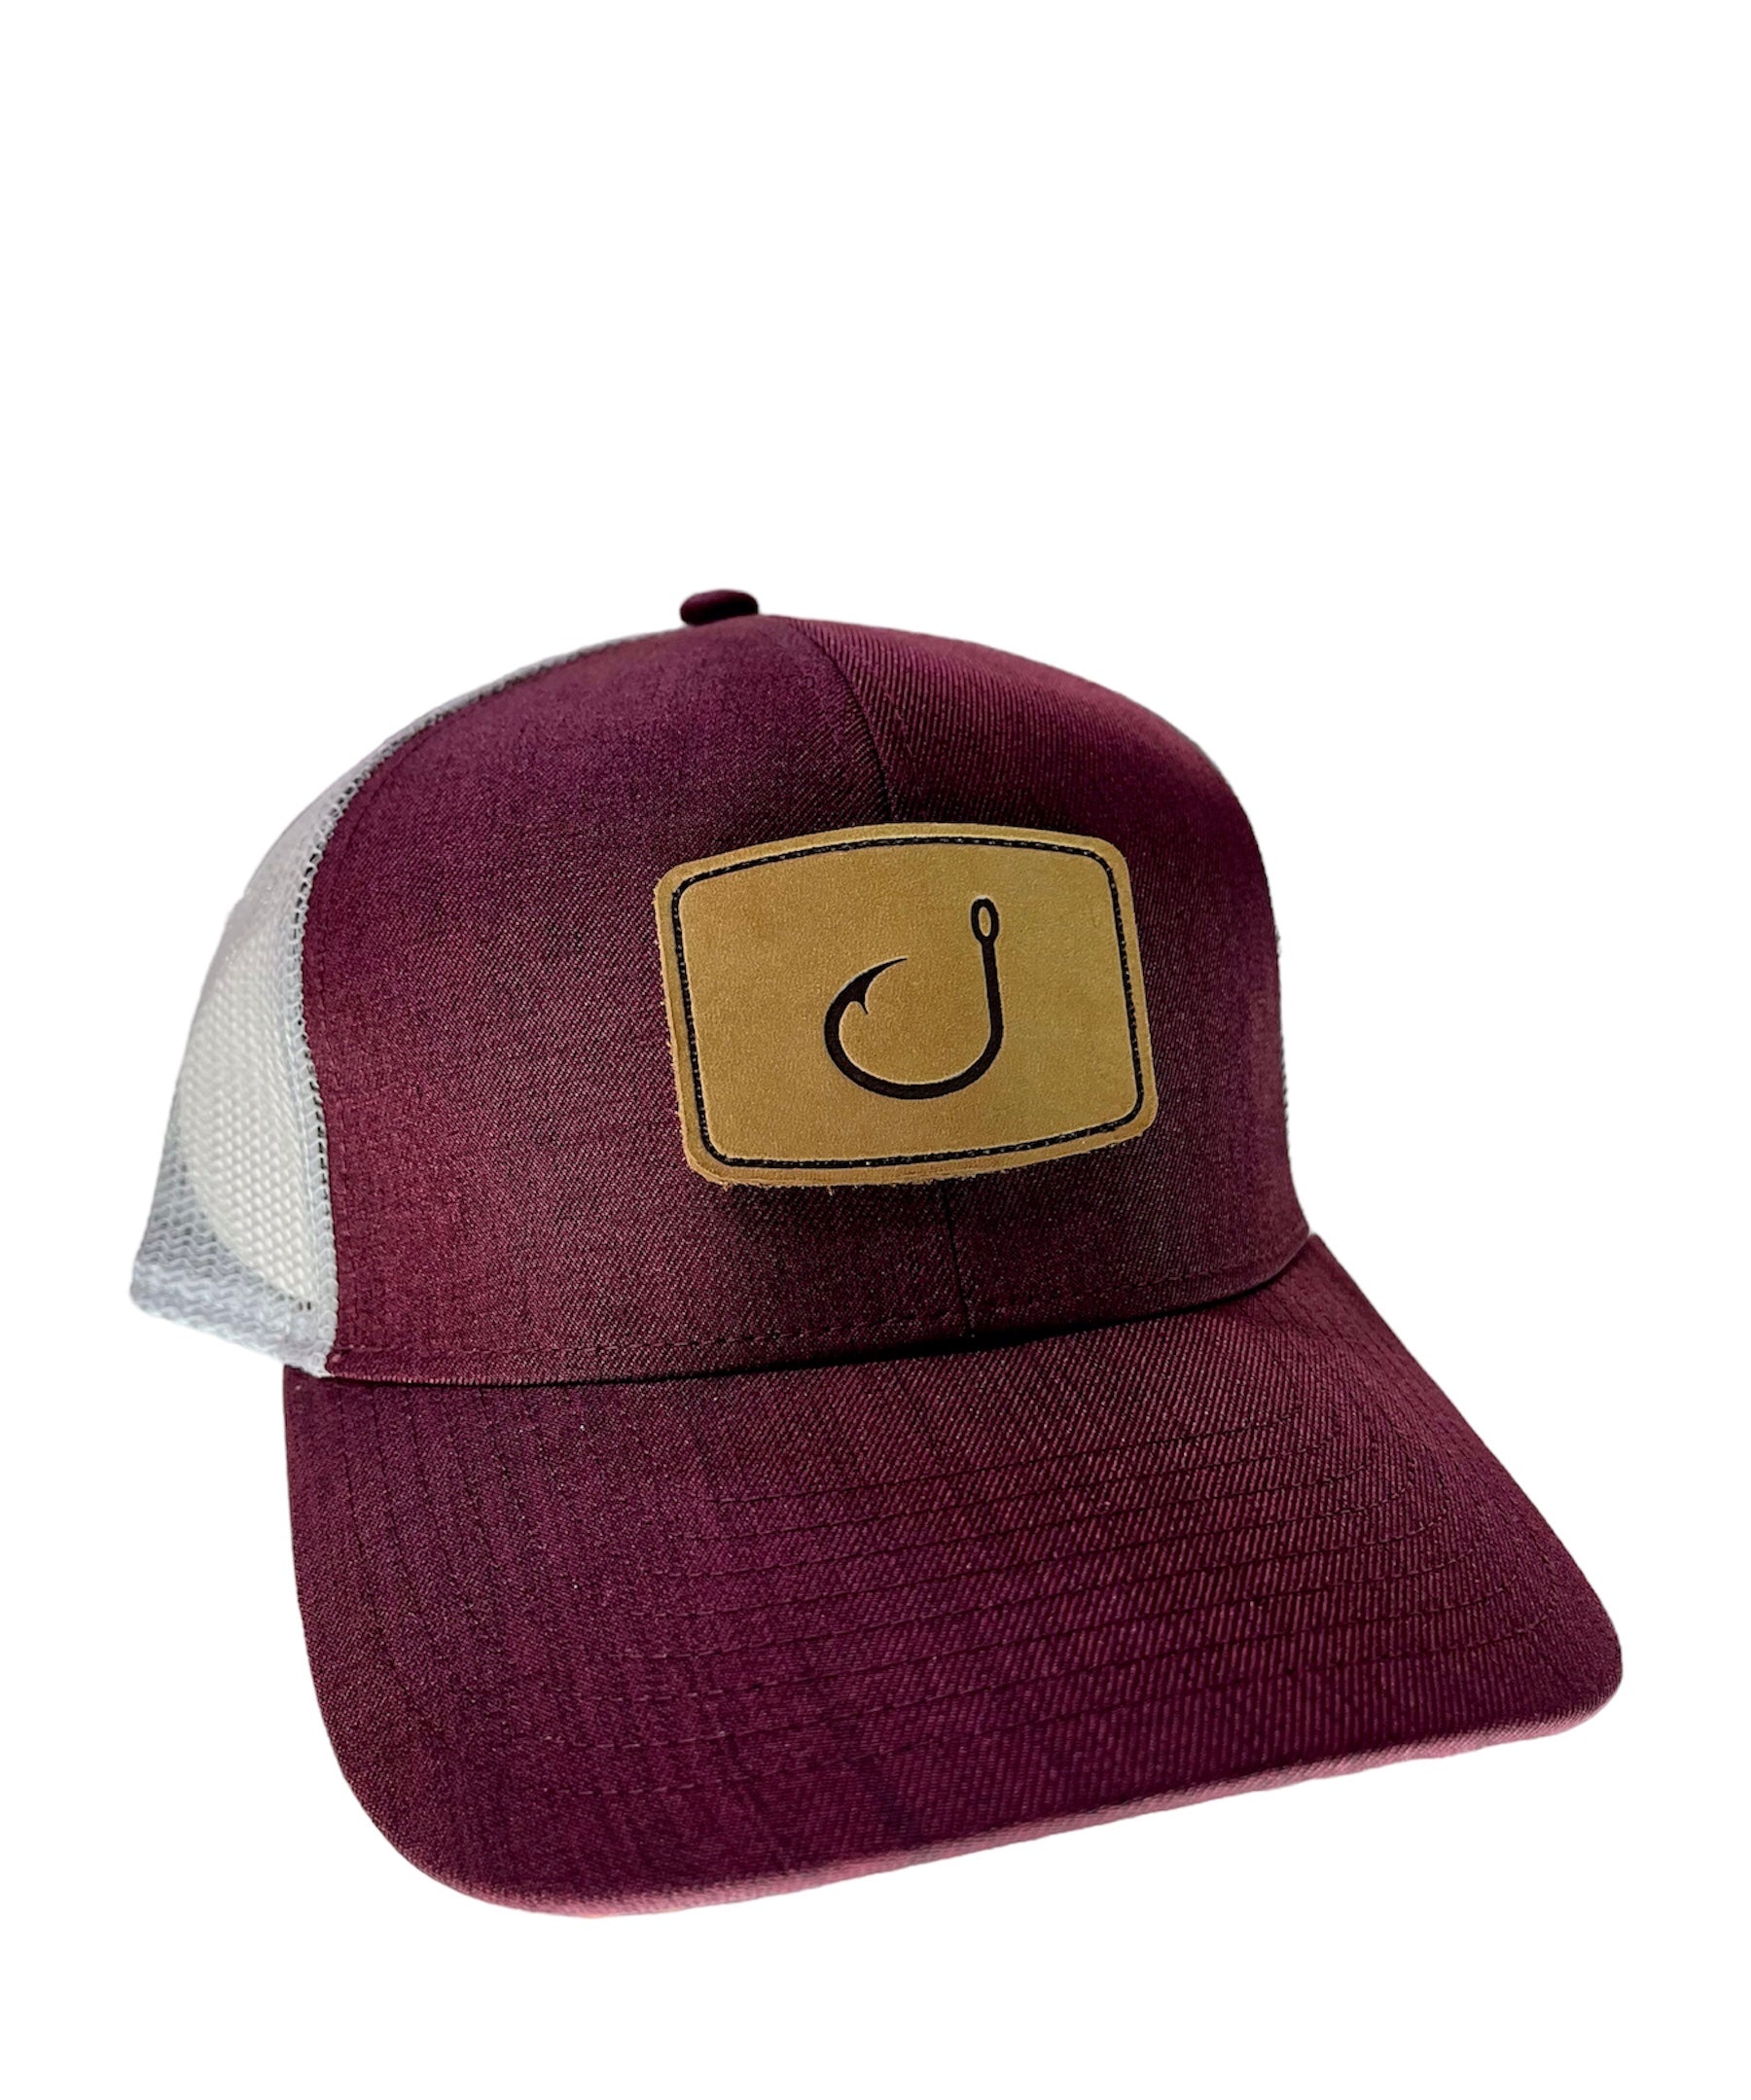 LAY DAY TRUCKER HAT WINE CHAMBRAY - Sal y Pesca Tackle Shop